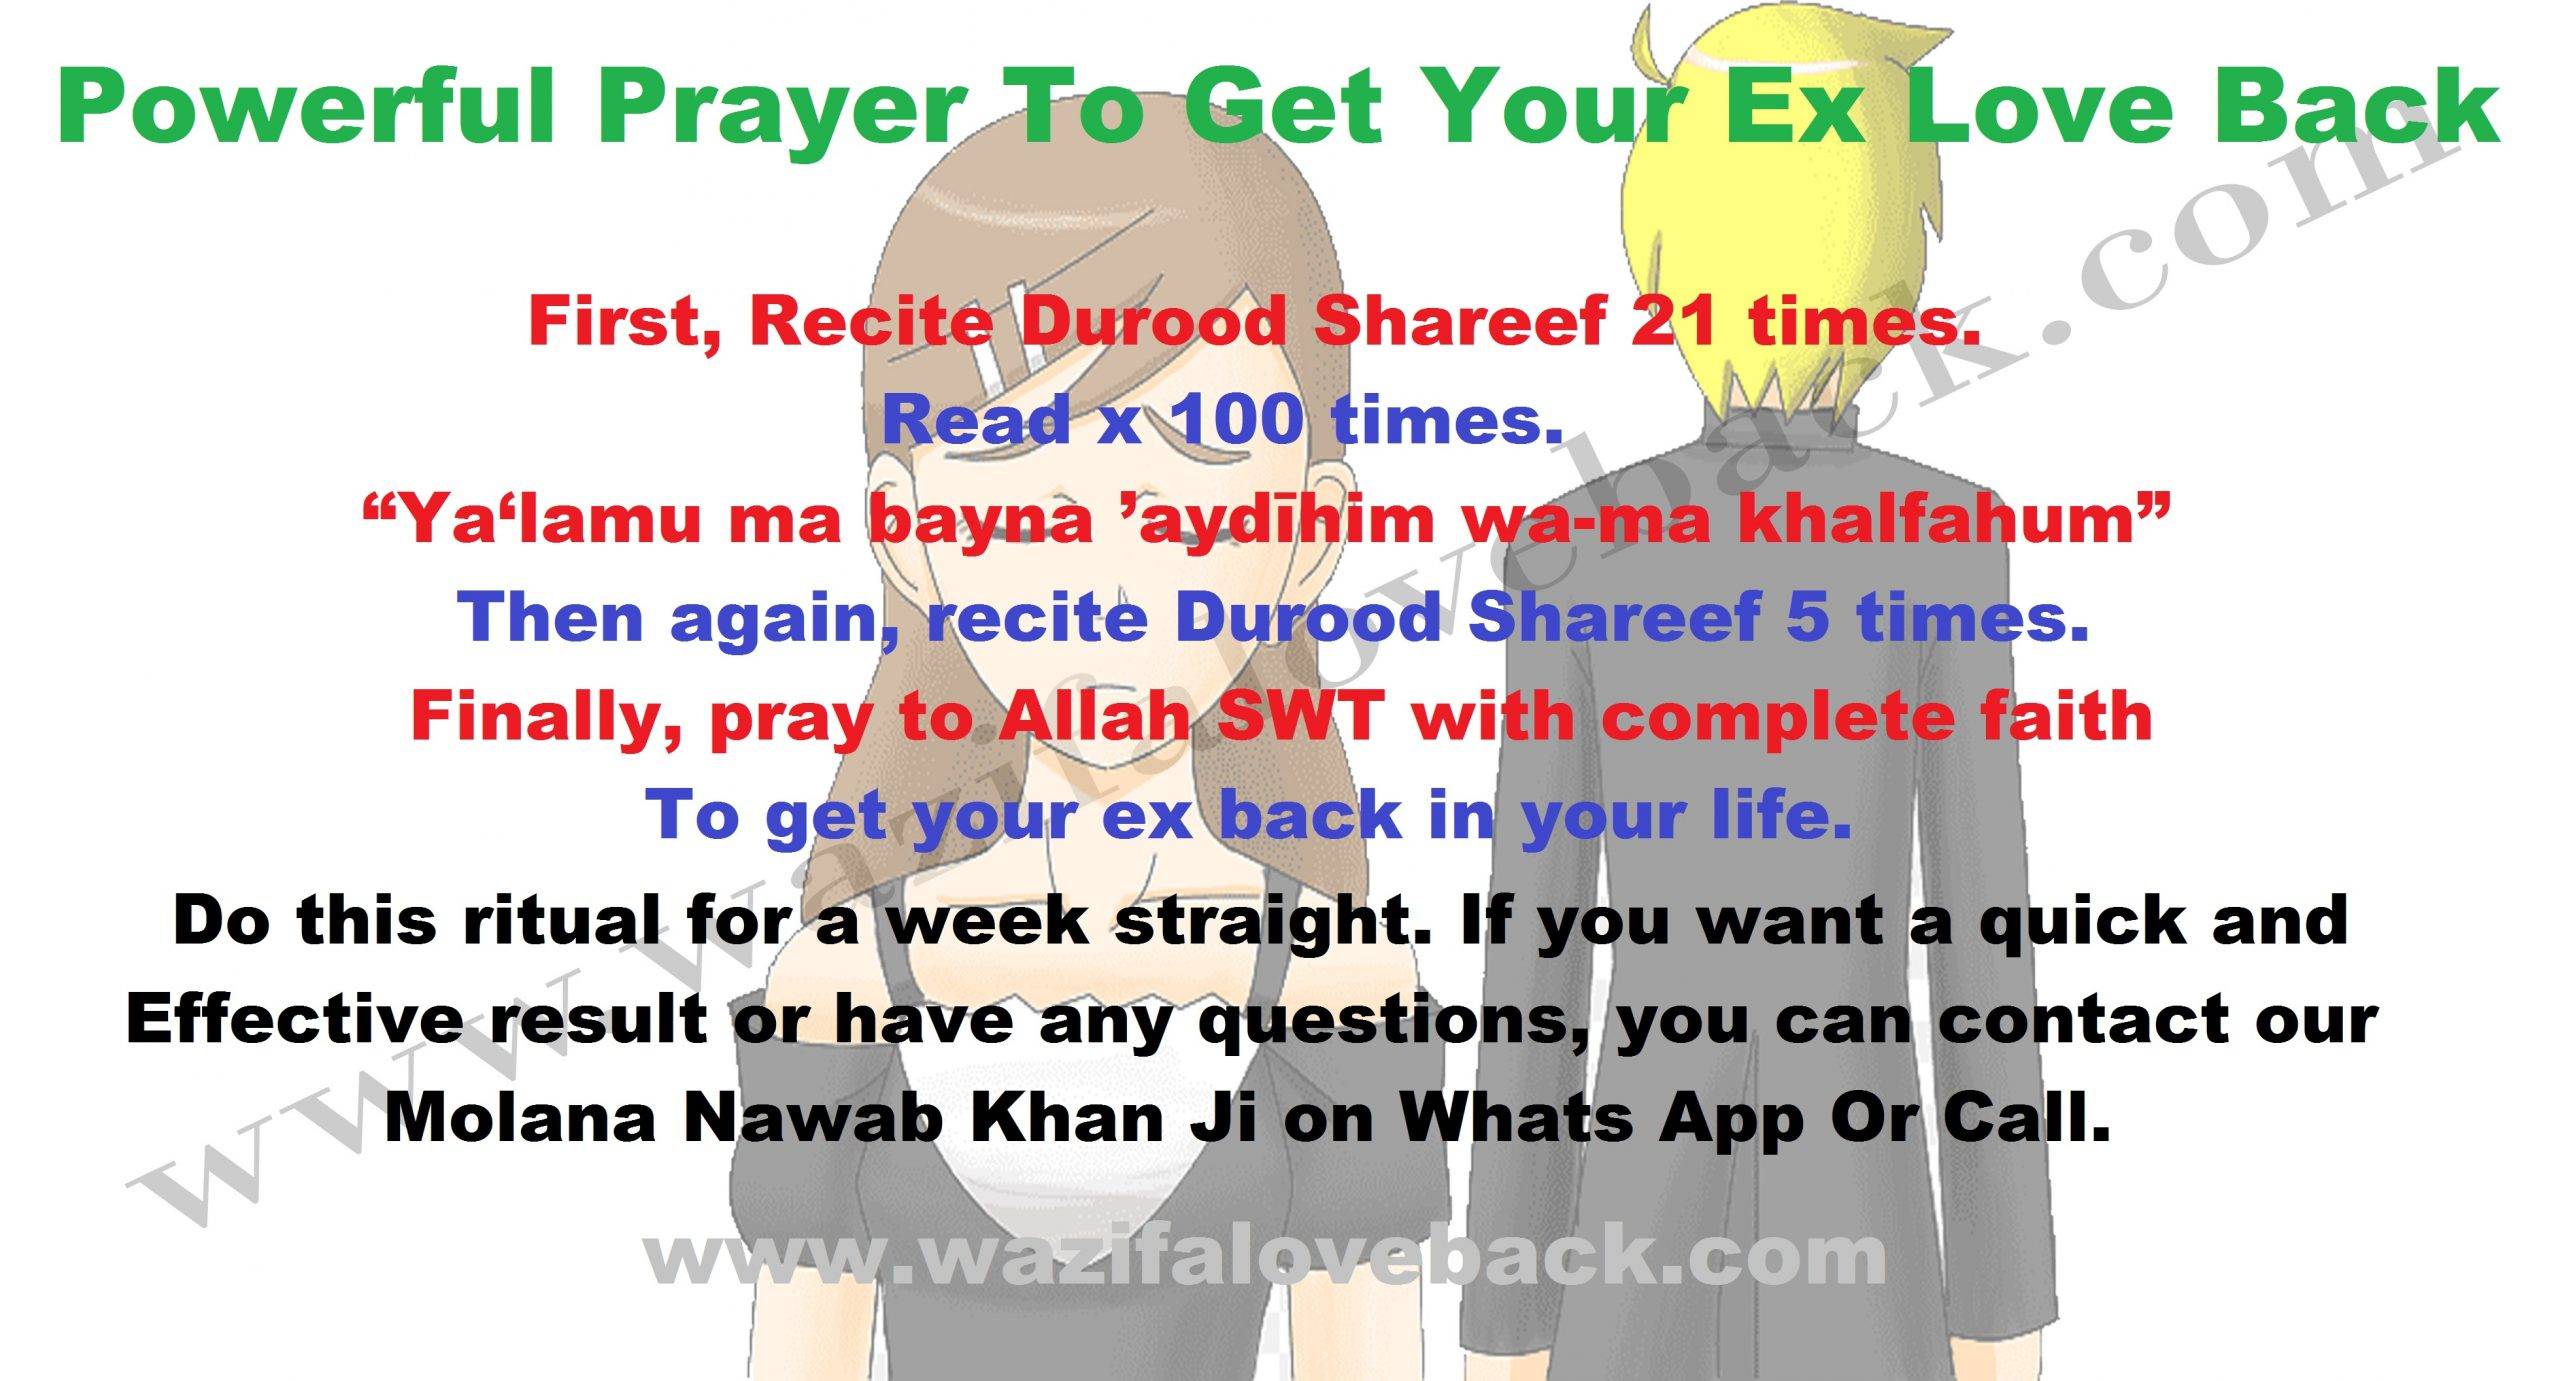 Powerful Prayer To Get Your Ex Love Back